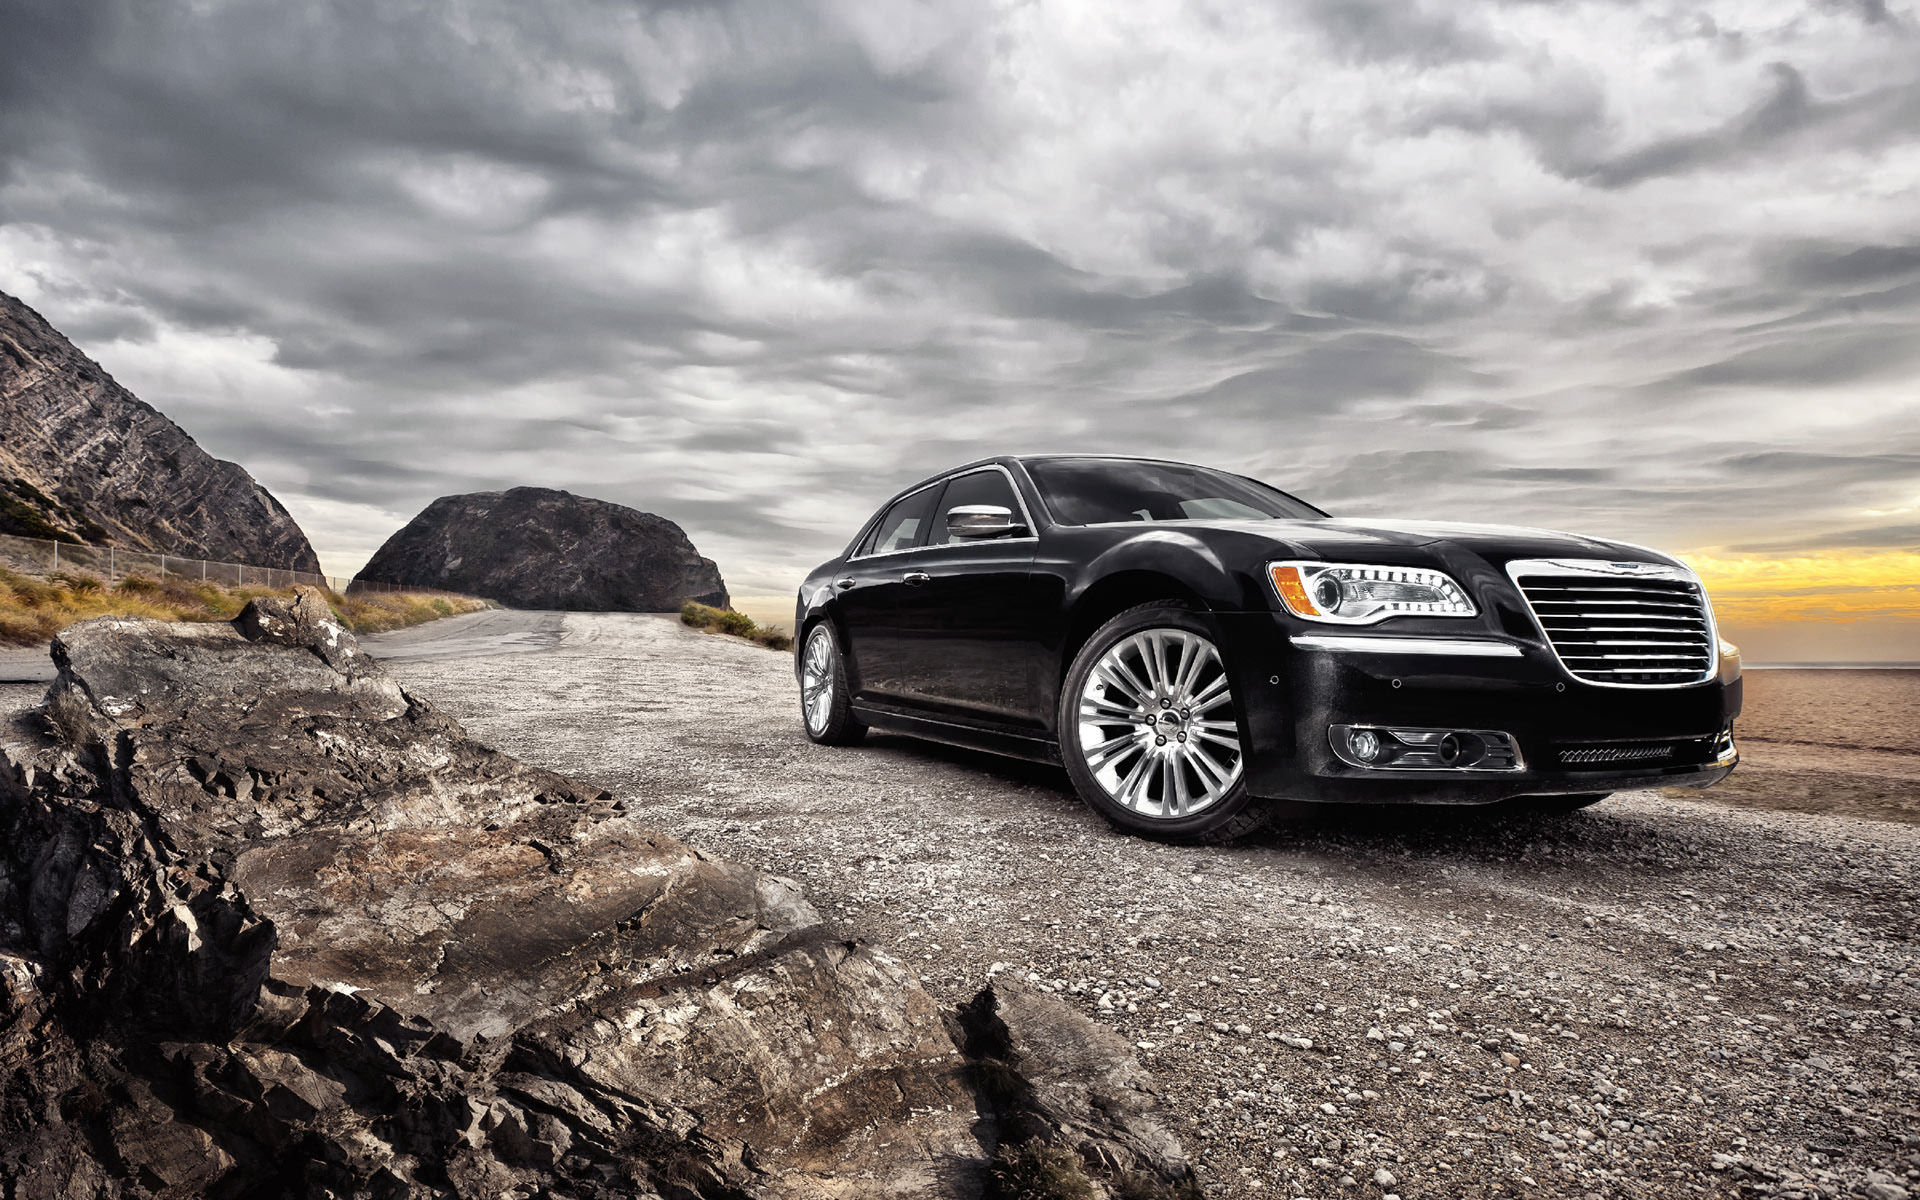 New Chrysler 300 wallpapers and images   wallpapers pictures photos